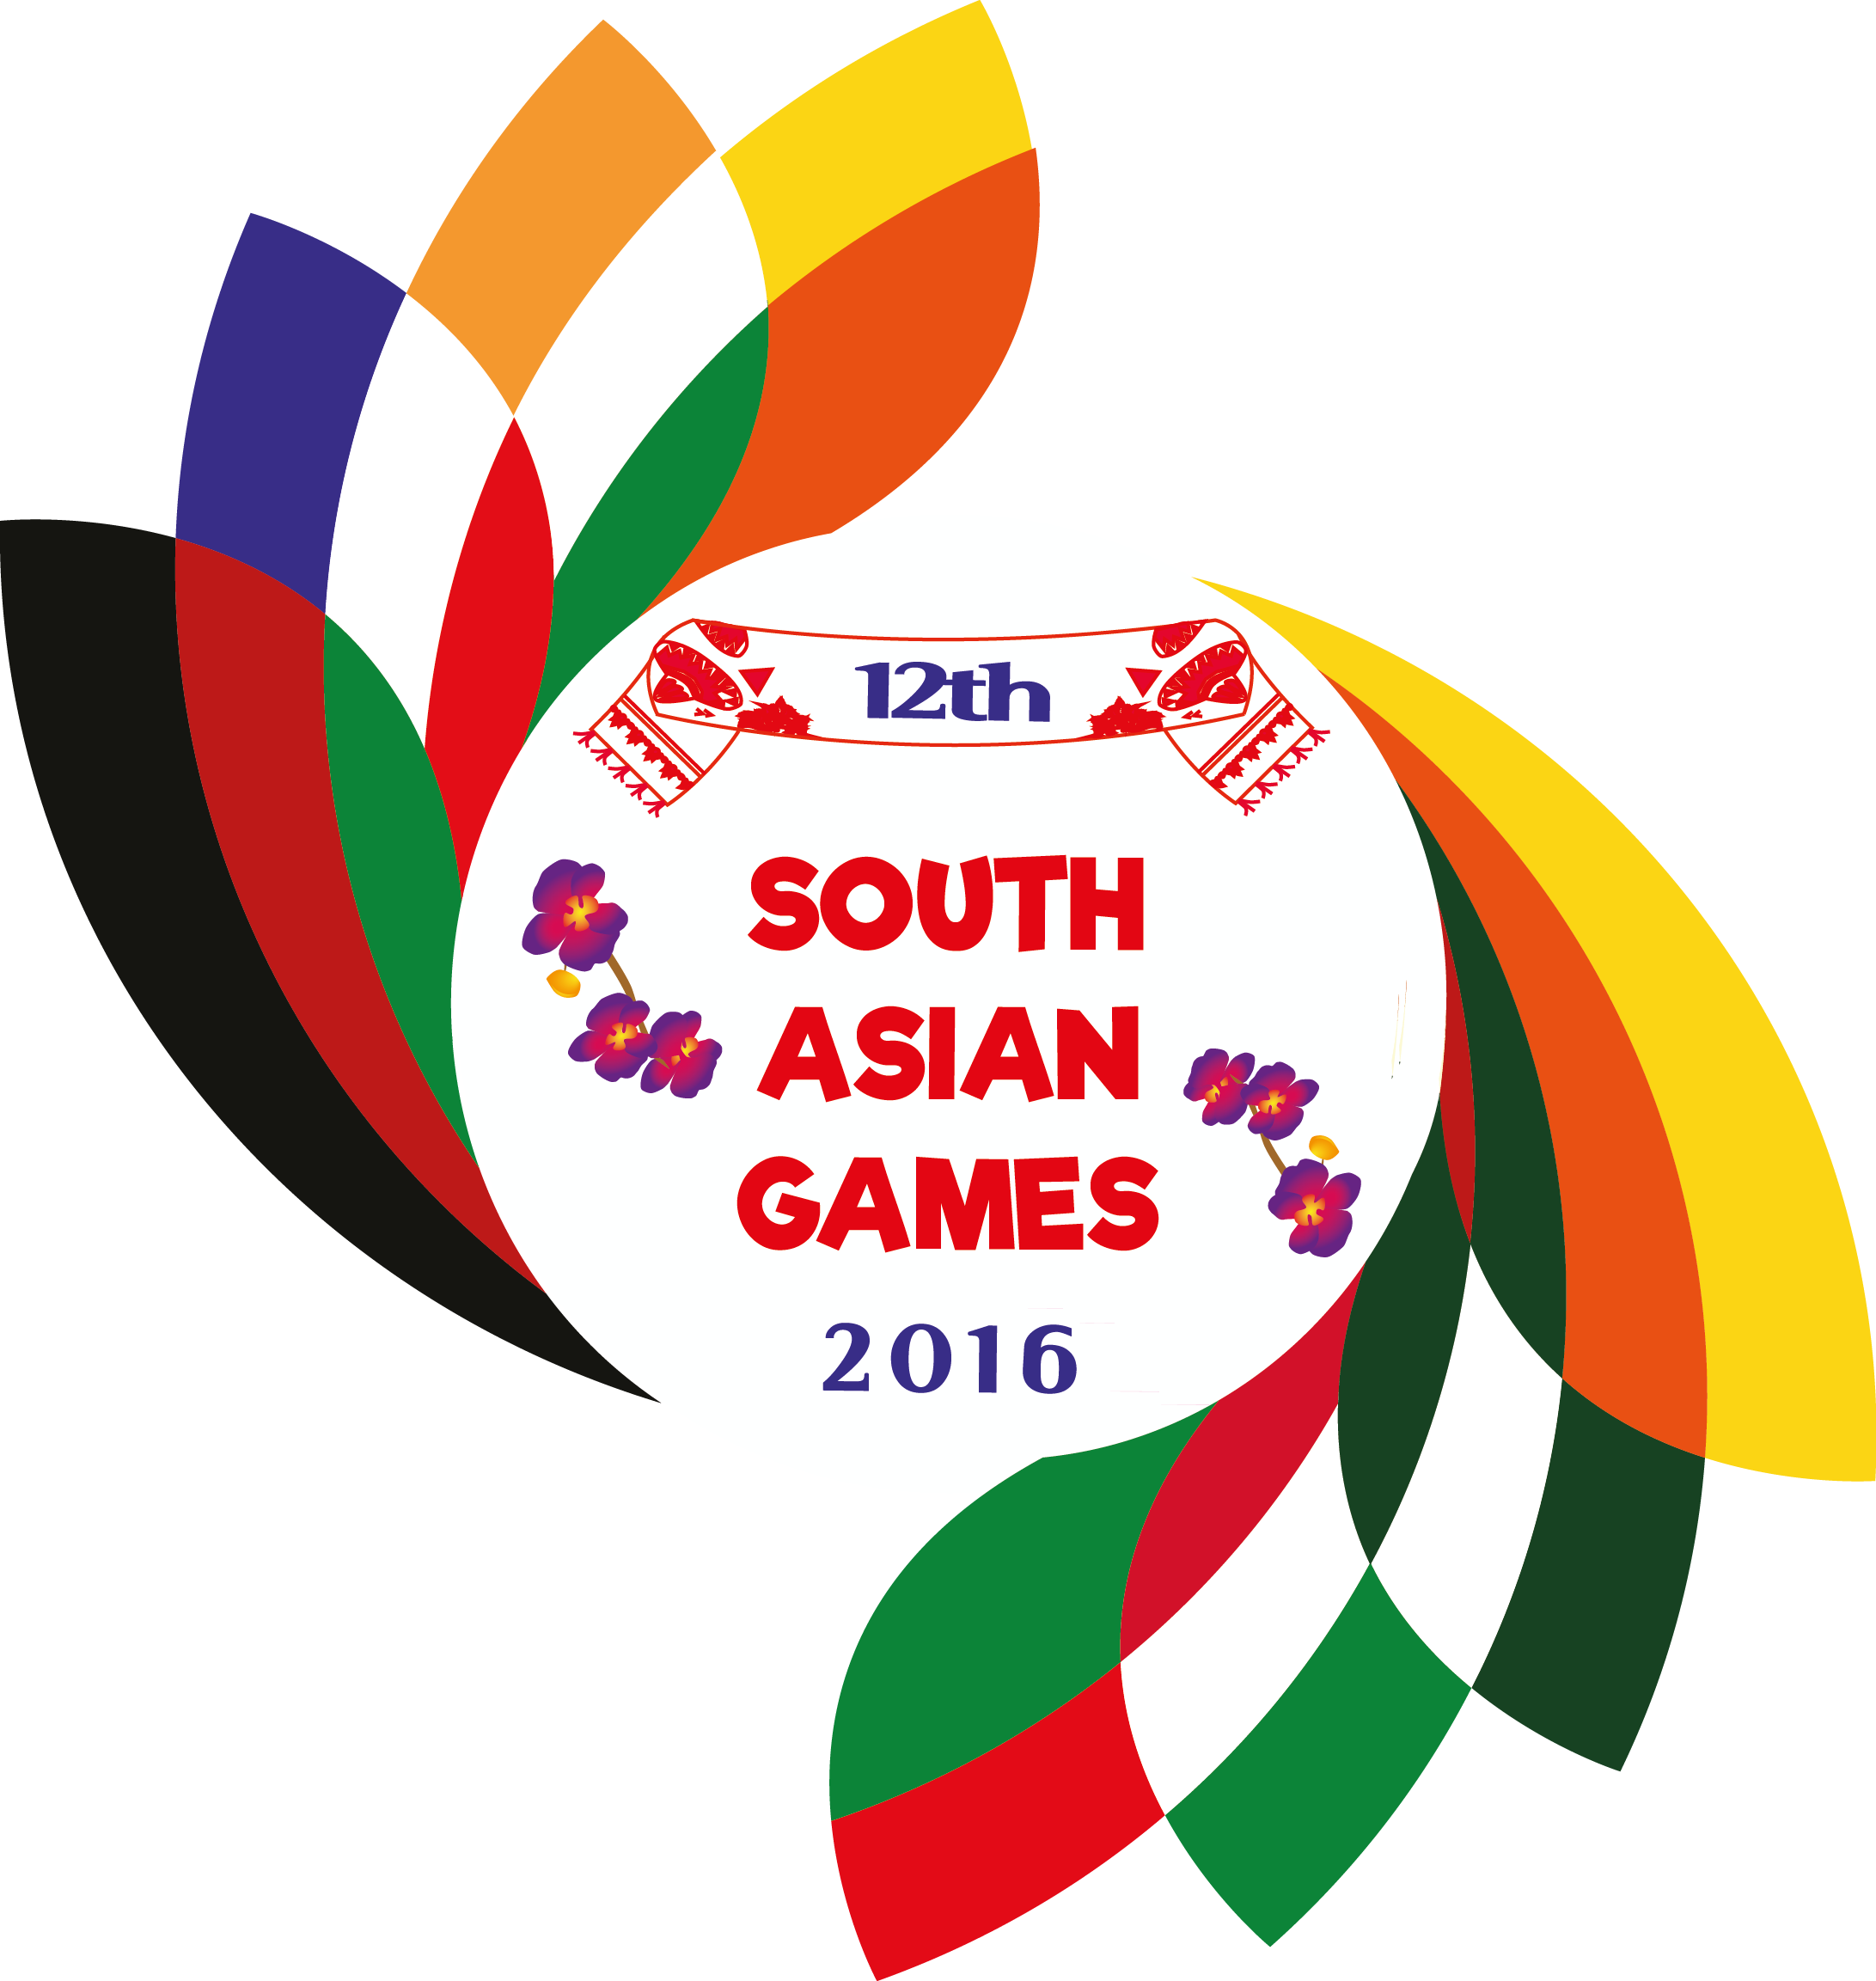 South Asian Games 2016